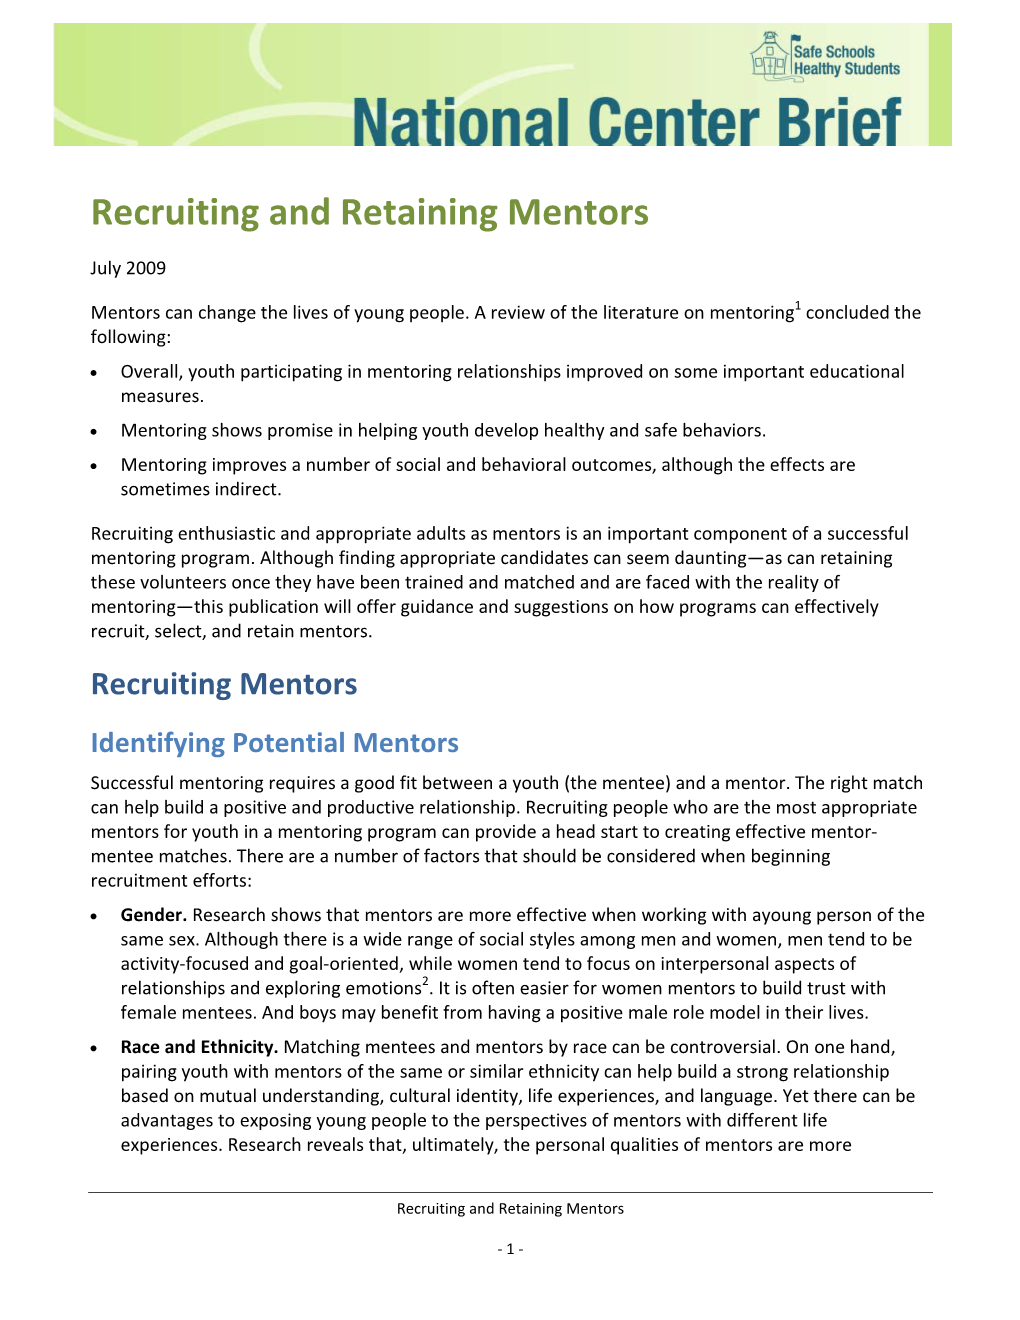 Recruiting and Retaining Mentors